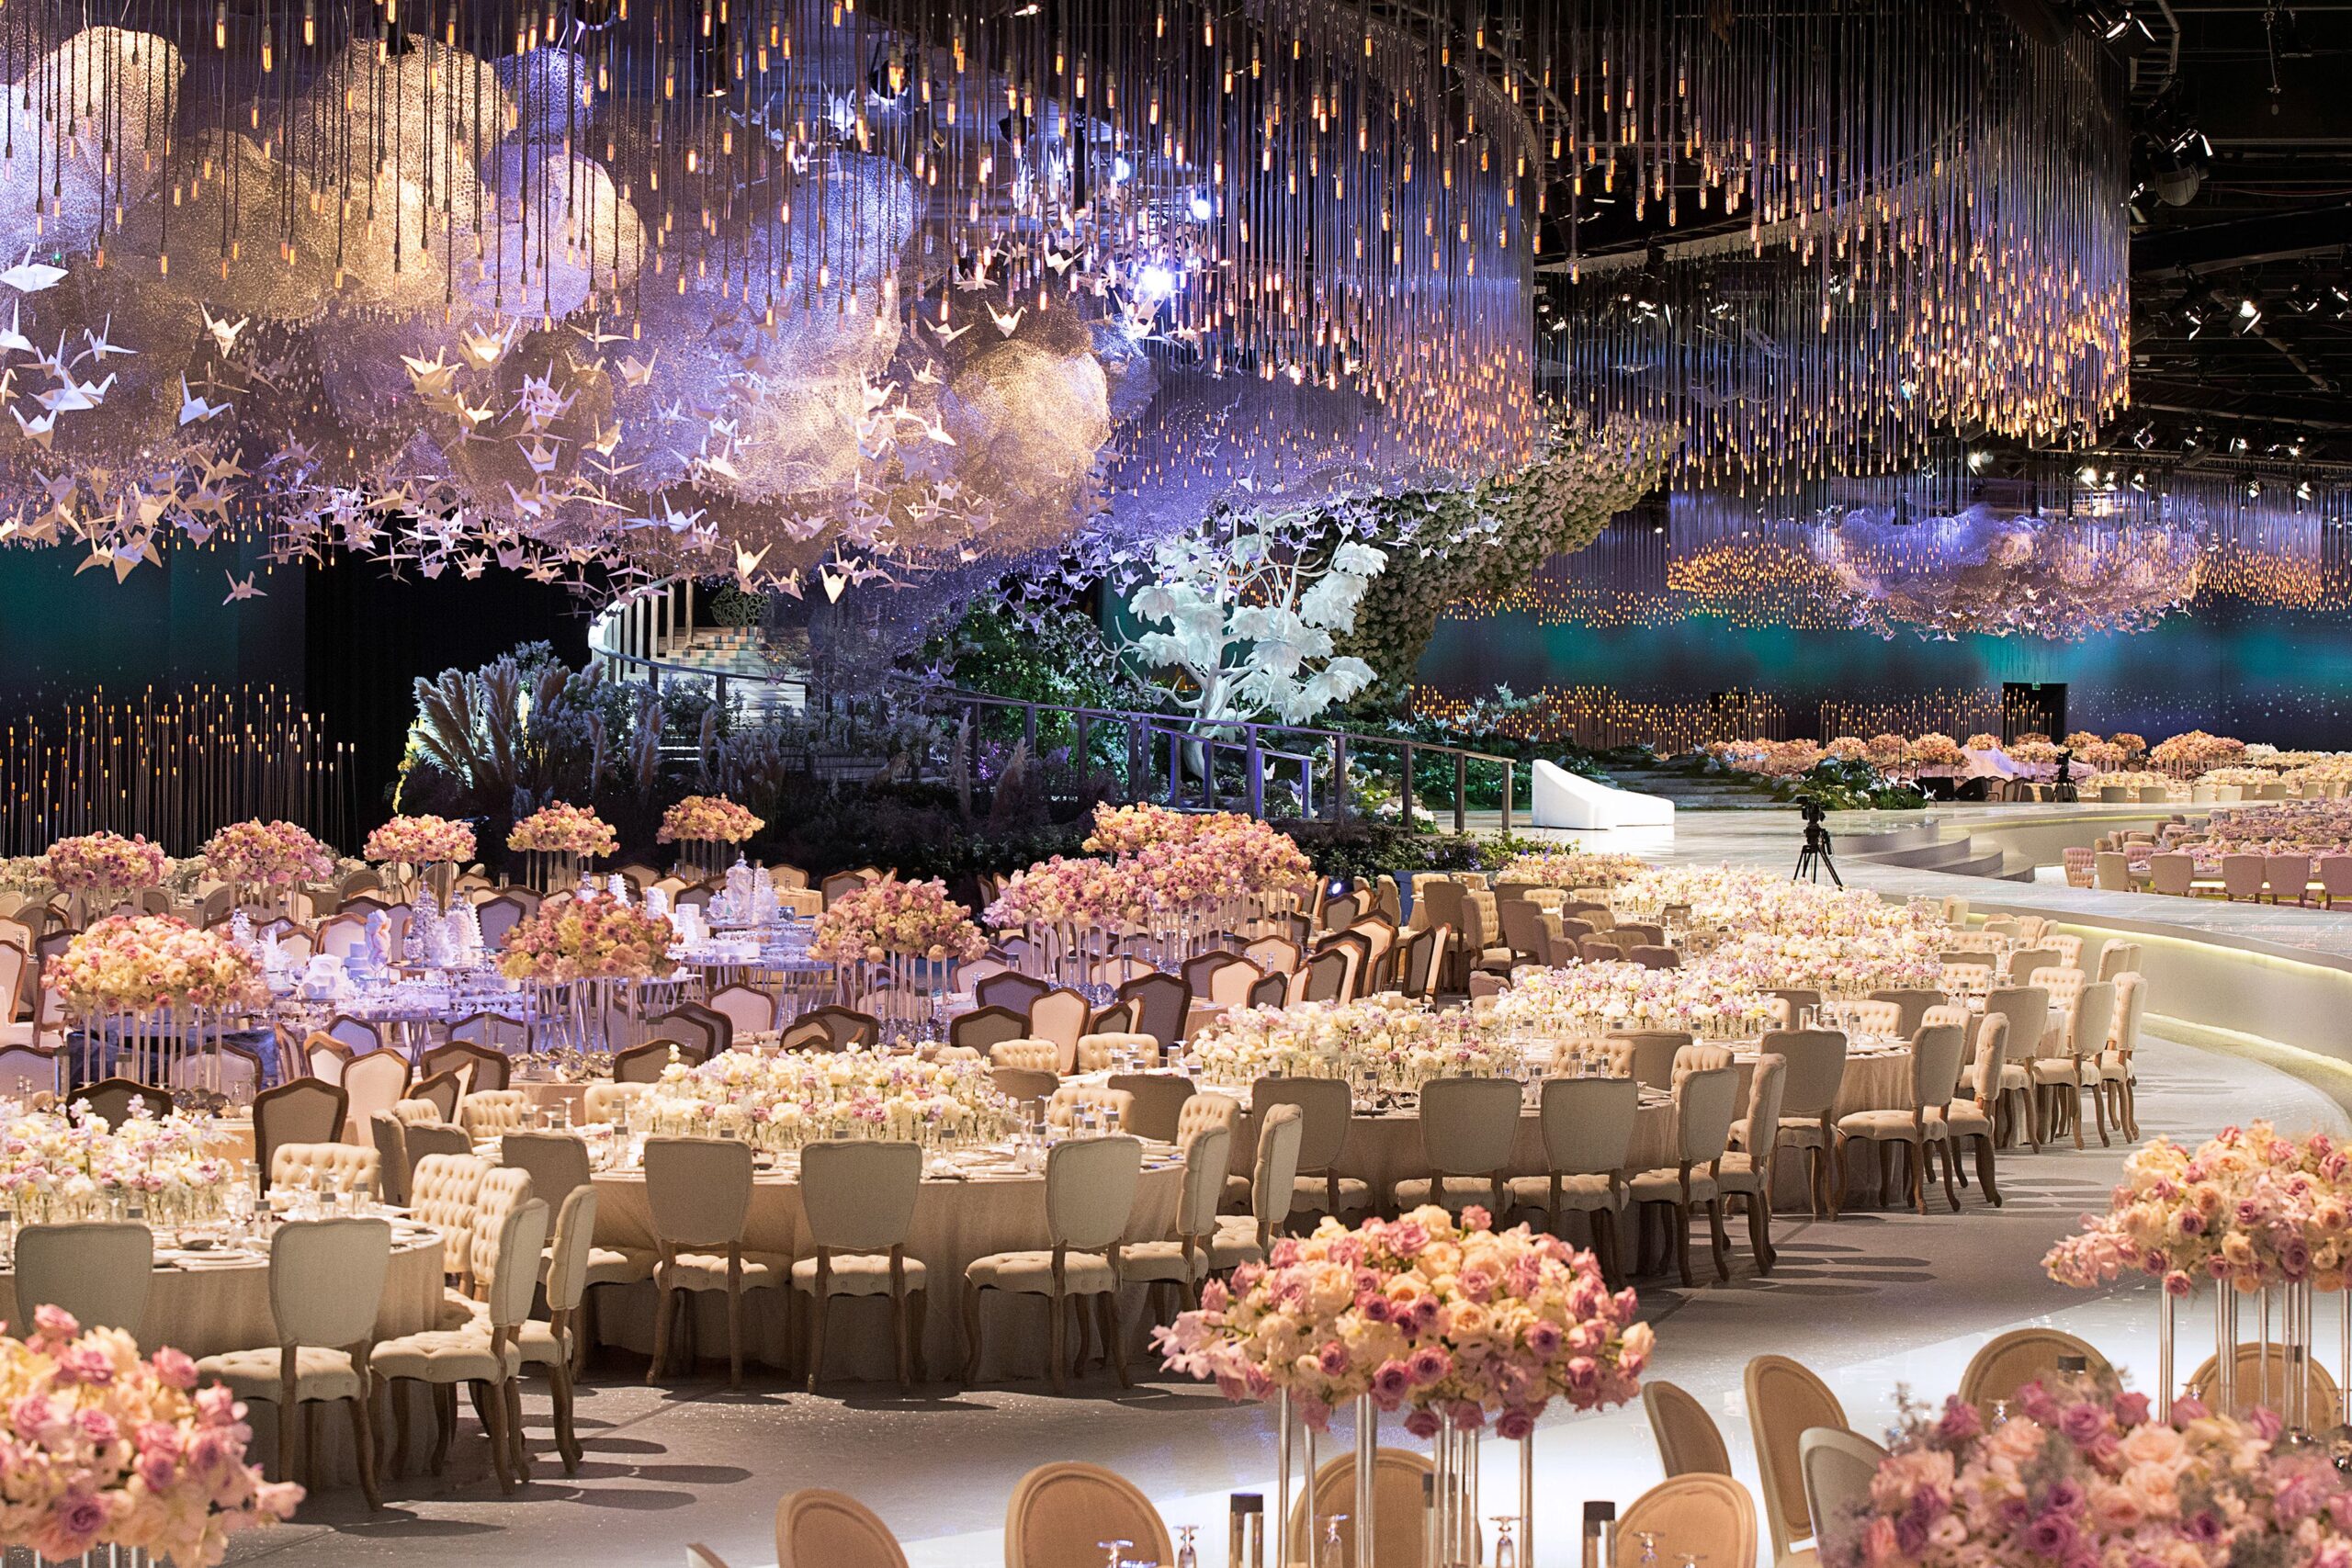 Event Management and Wedding Decorators: Crafting Unforgettable Celebrations